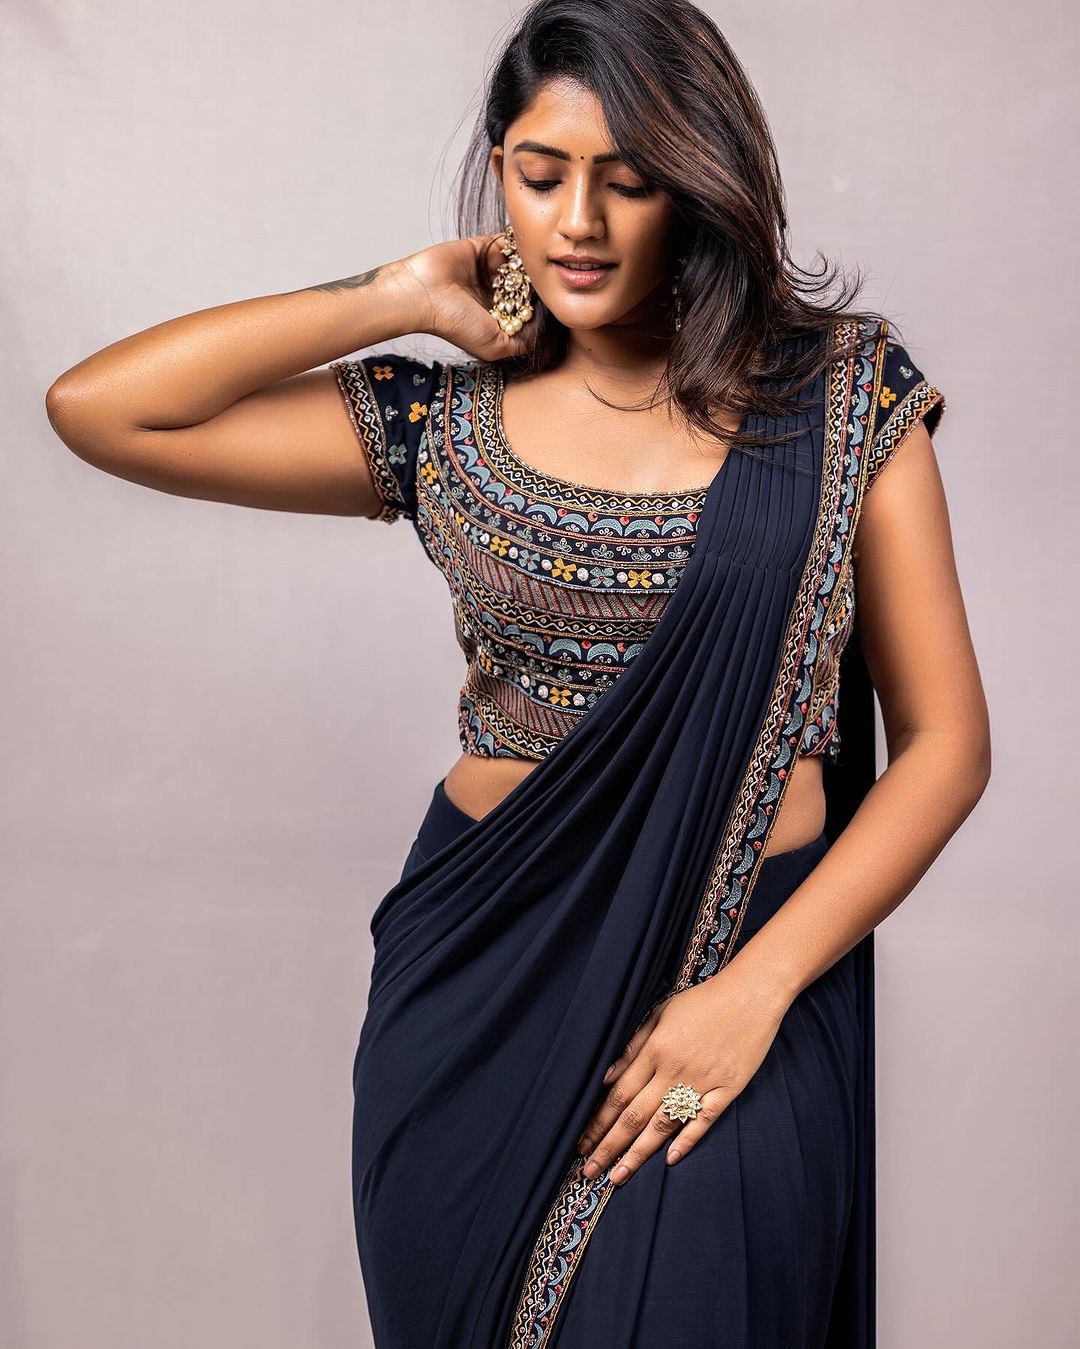 Actress eesha rebba is looking beautiful in this clicks-Actresseesha, Eesha Rebba Photos,Spicy Hot Pics,Images,High Resolution WallPapers Download